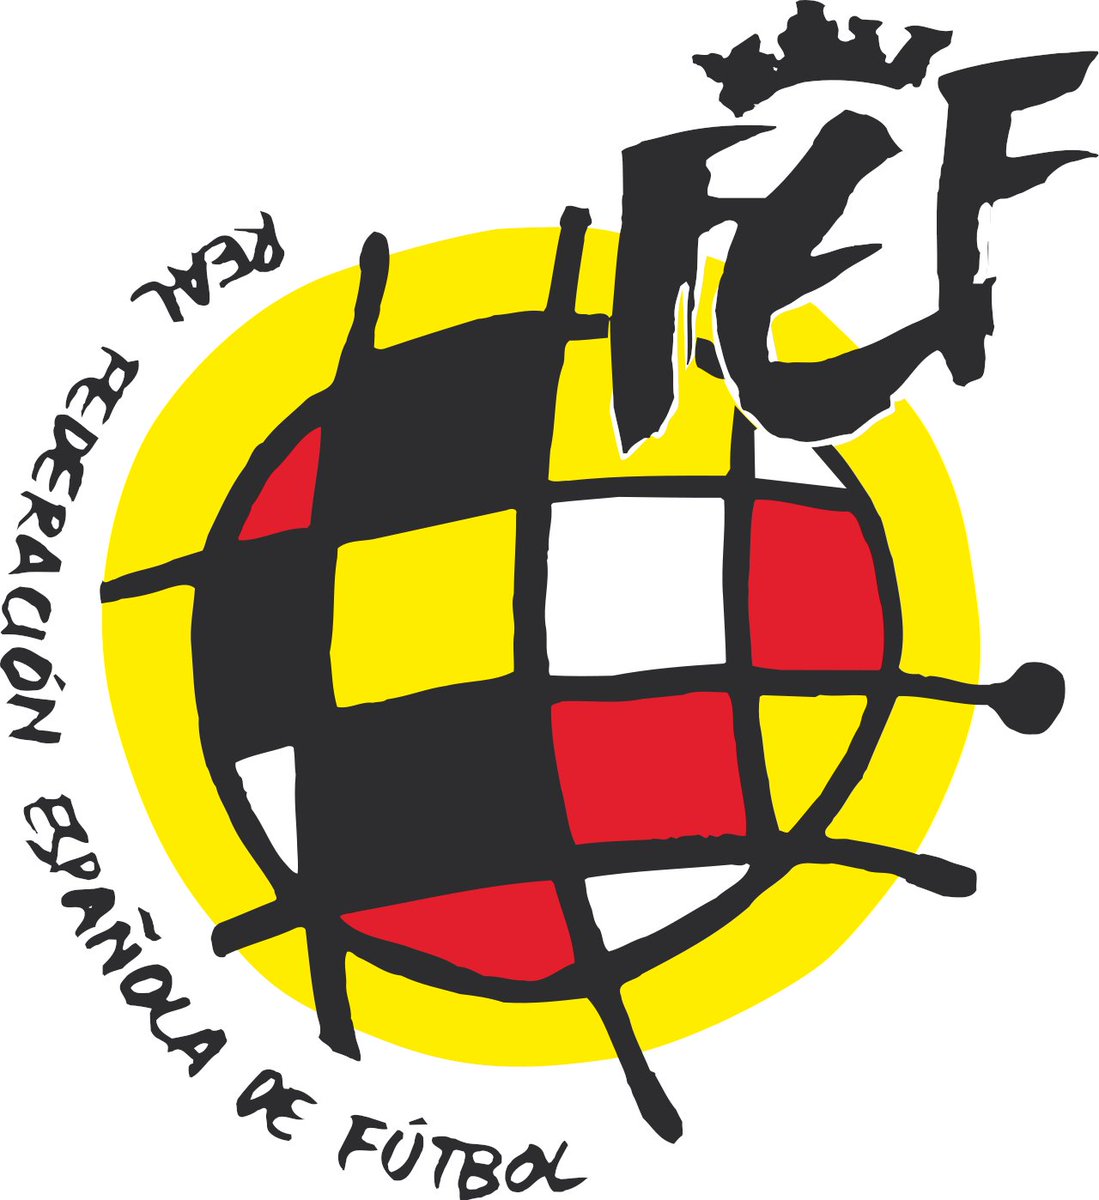 Finally, let’s skip forward to 1990. That year, Angel María Villar and Paolo Rossi presented the new logo of the Royal Spanish Football Federation (RFEF), which was a Miró-inspired sun-cum-football.